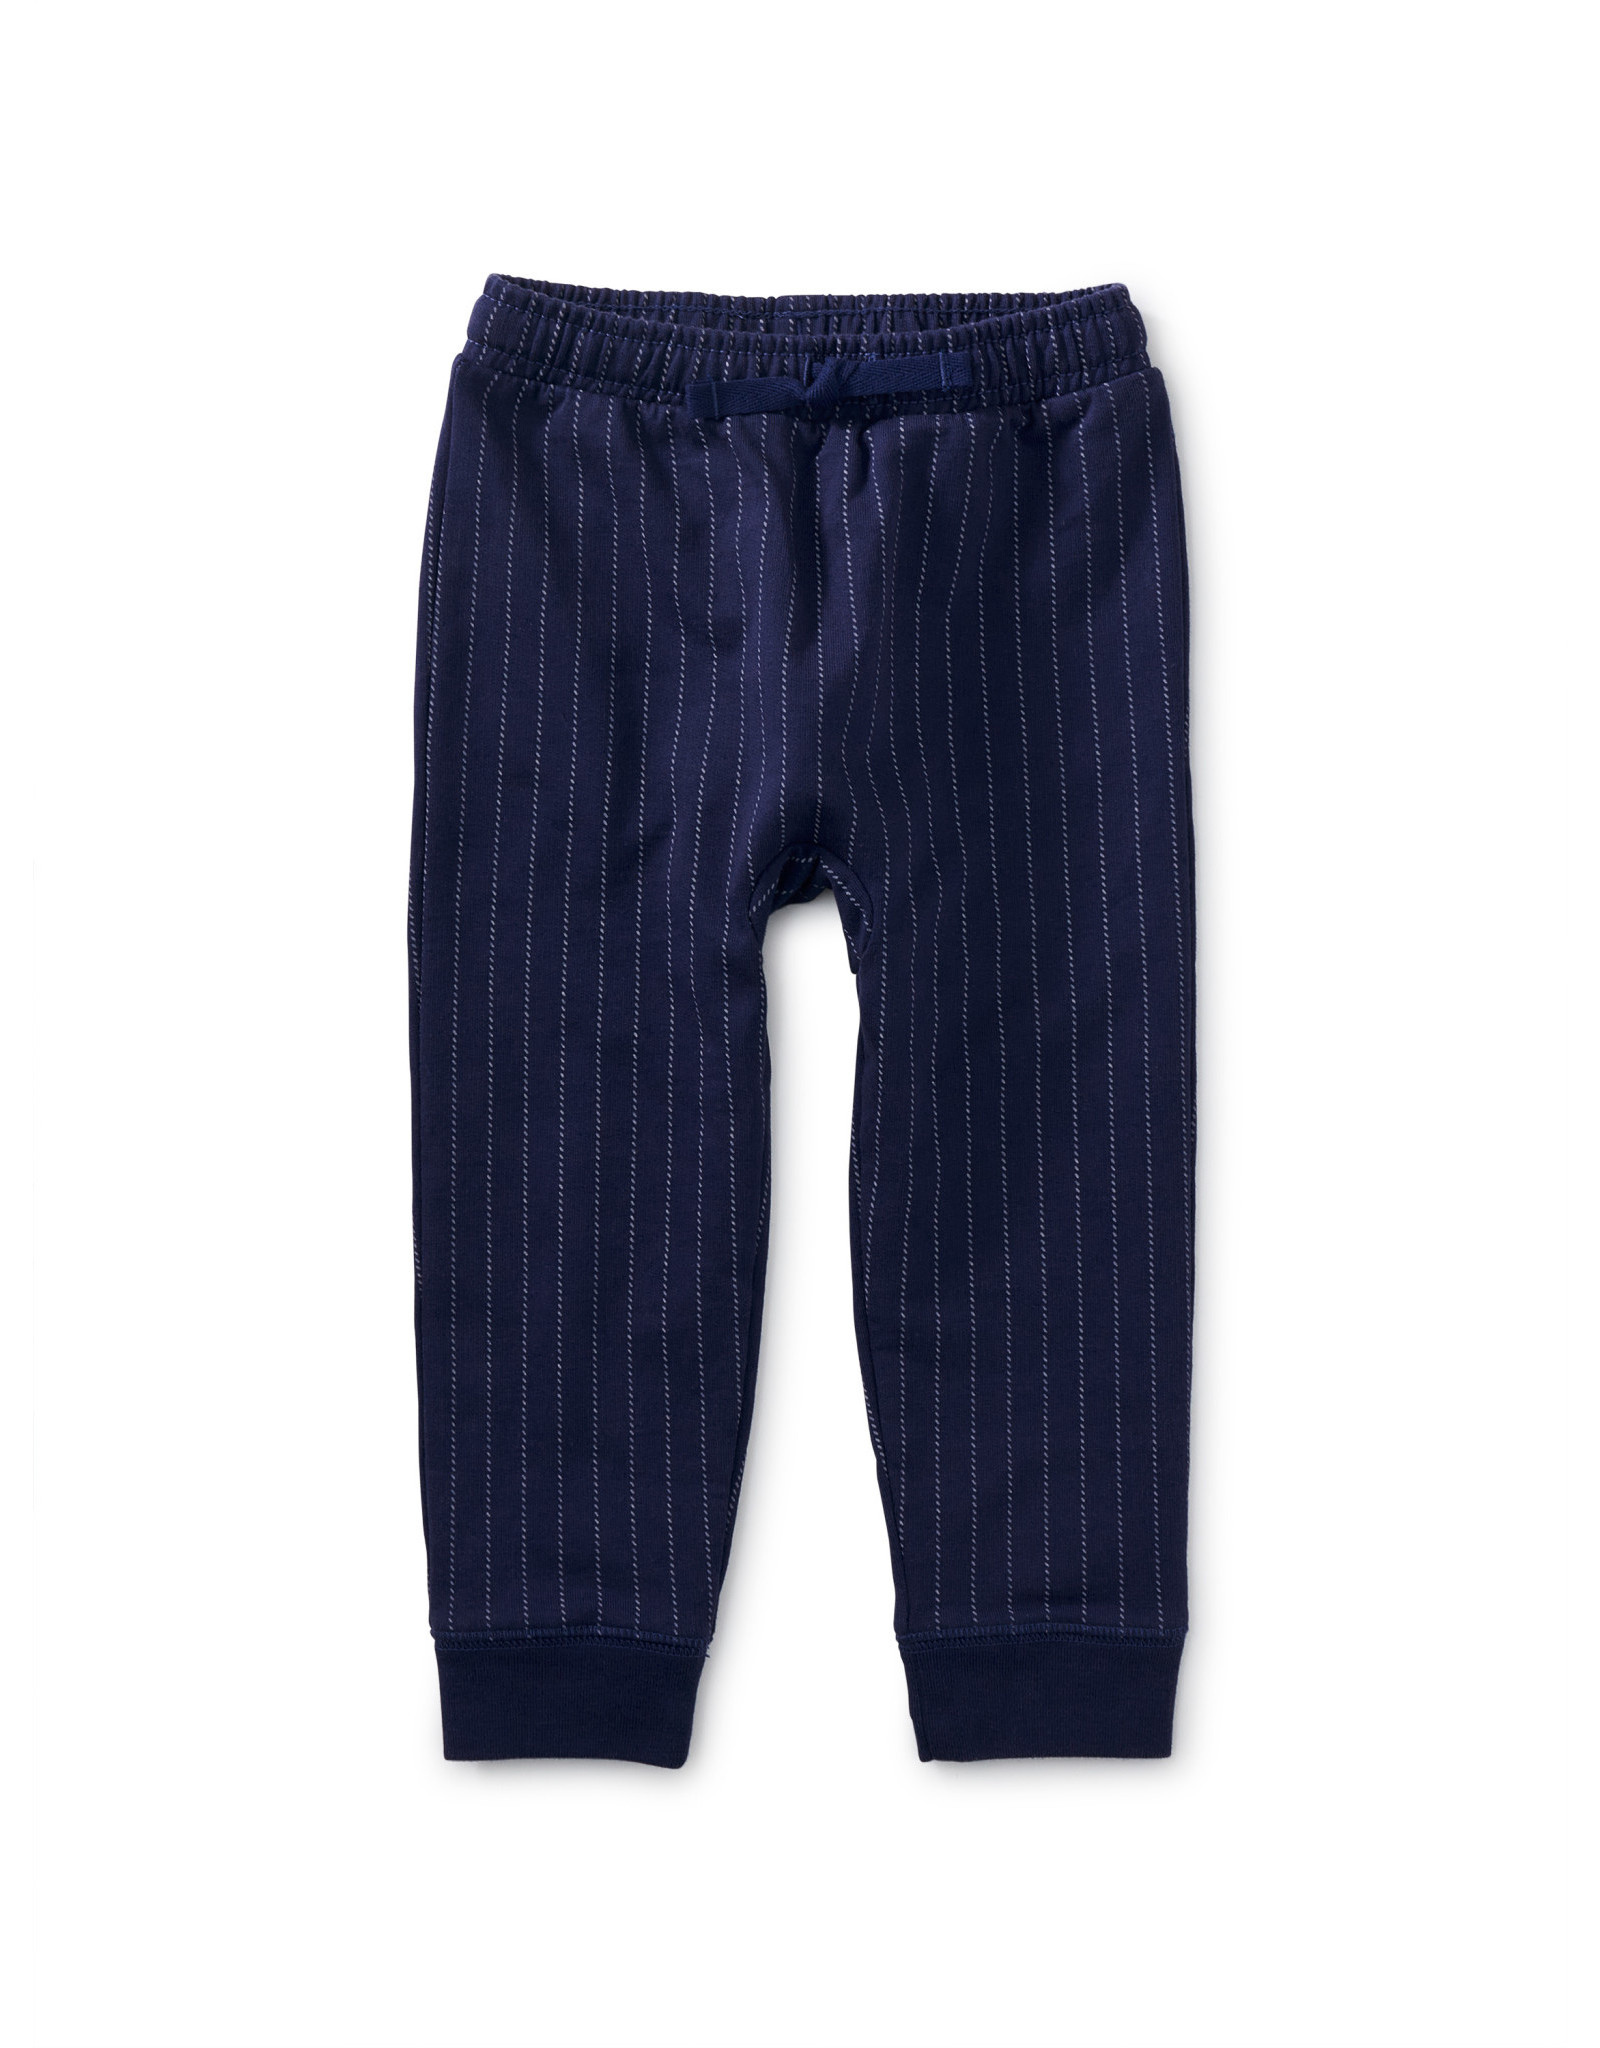 Tea Collection Good Sport Pocket Baby Joggers~Blue Ticking Stripe